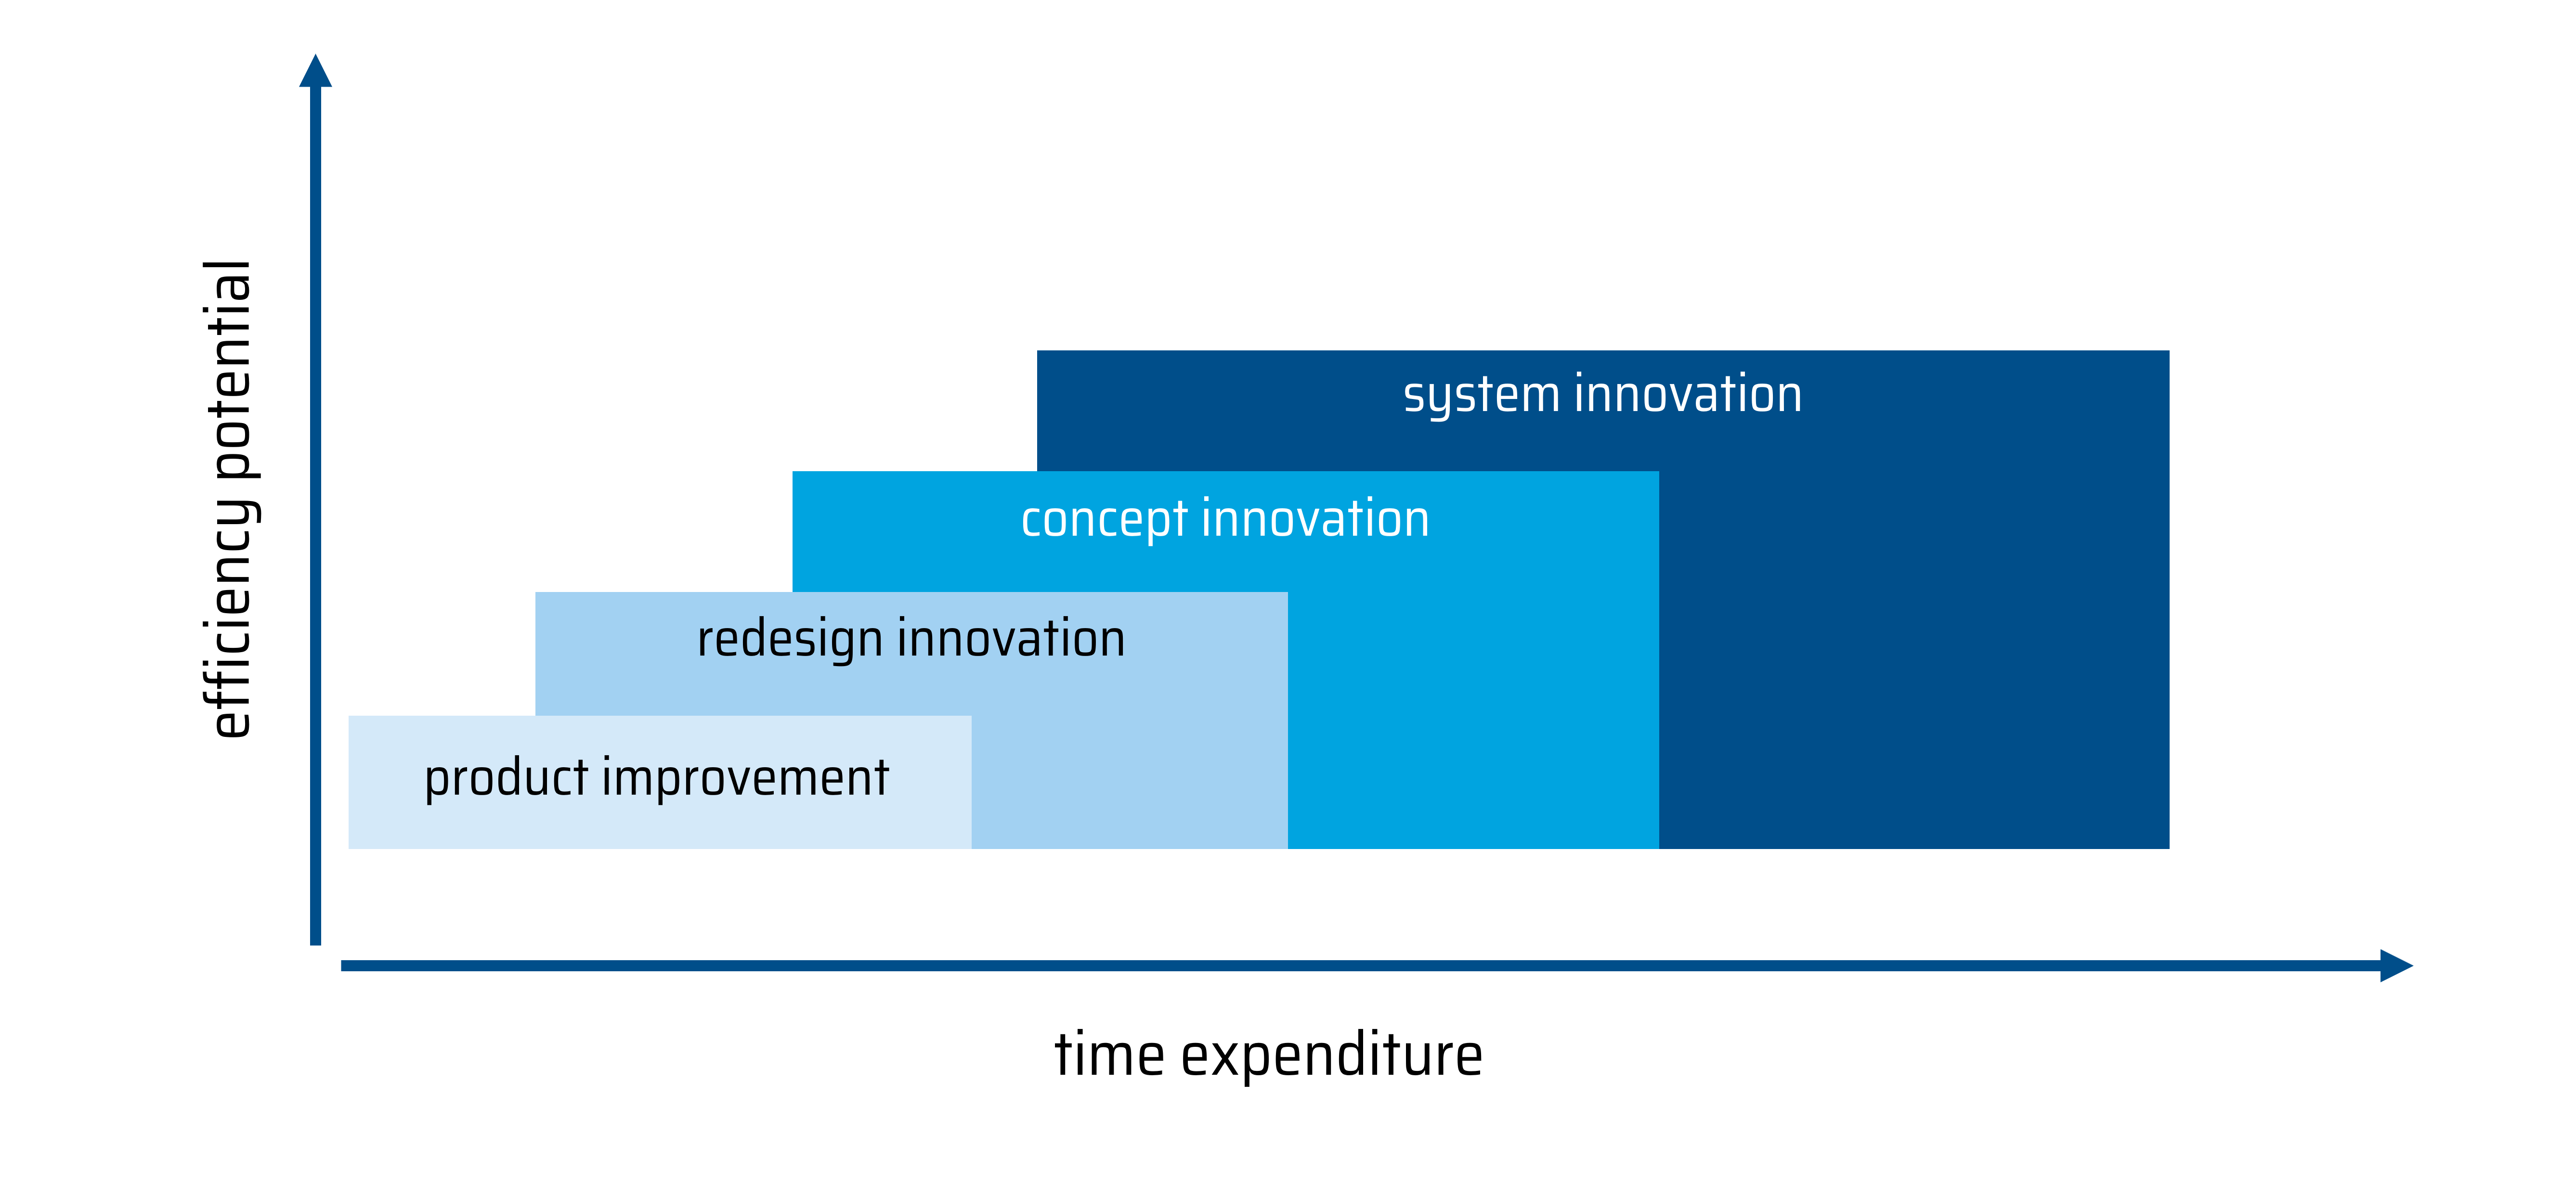 The figure illustrates the innovation stages that contribute to successively increasing the resource efficiency of products.